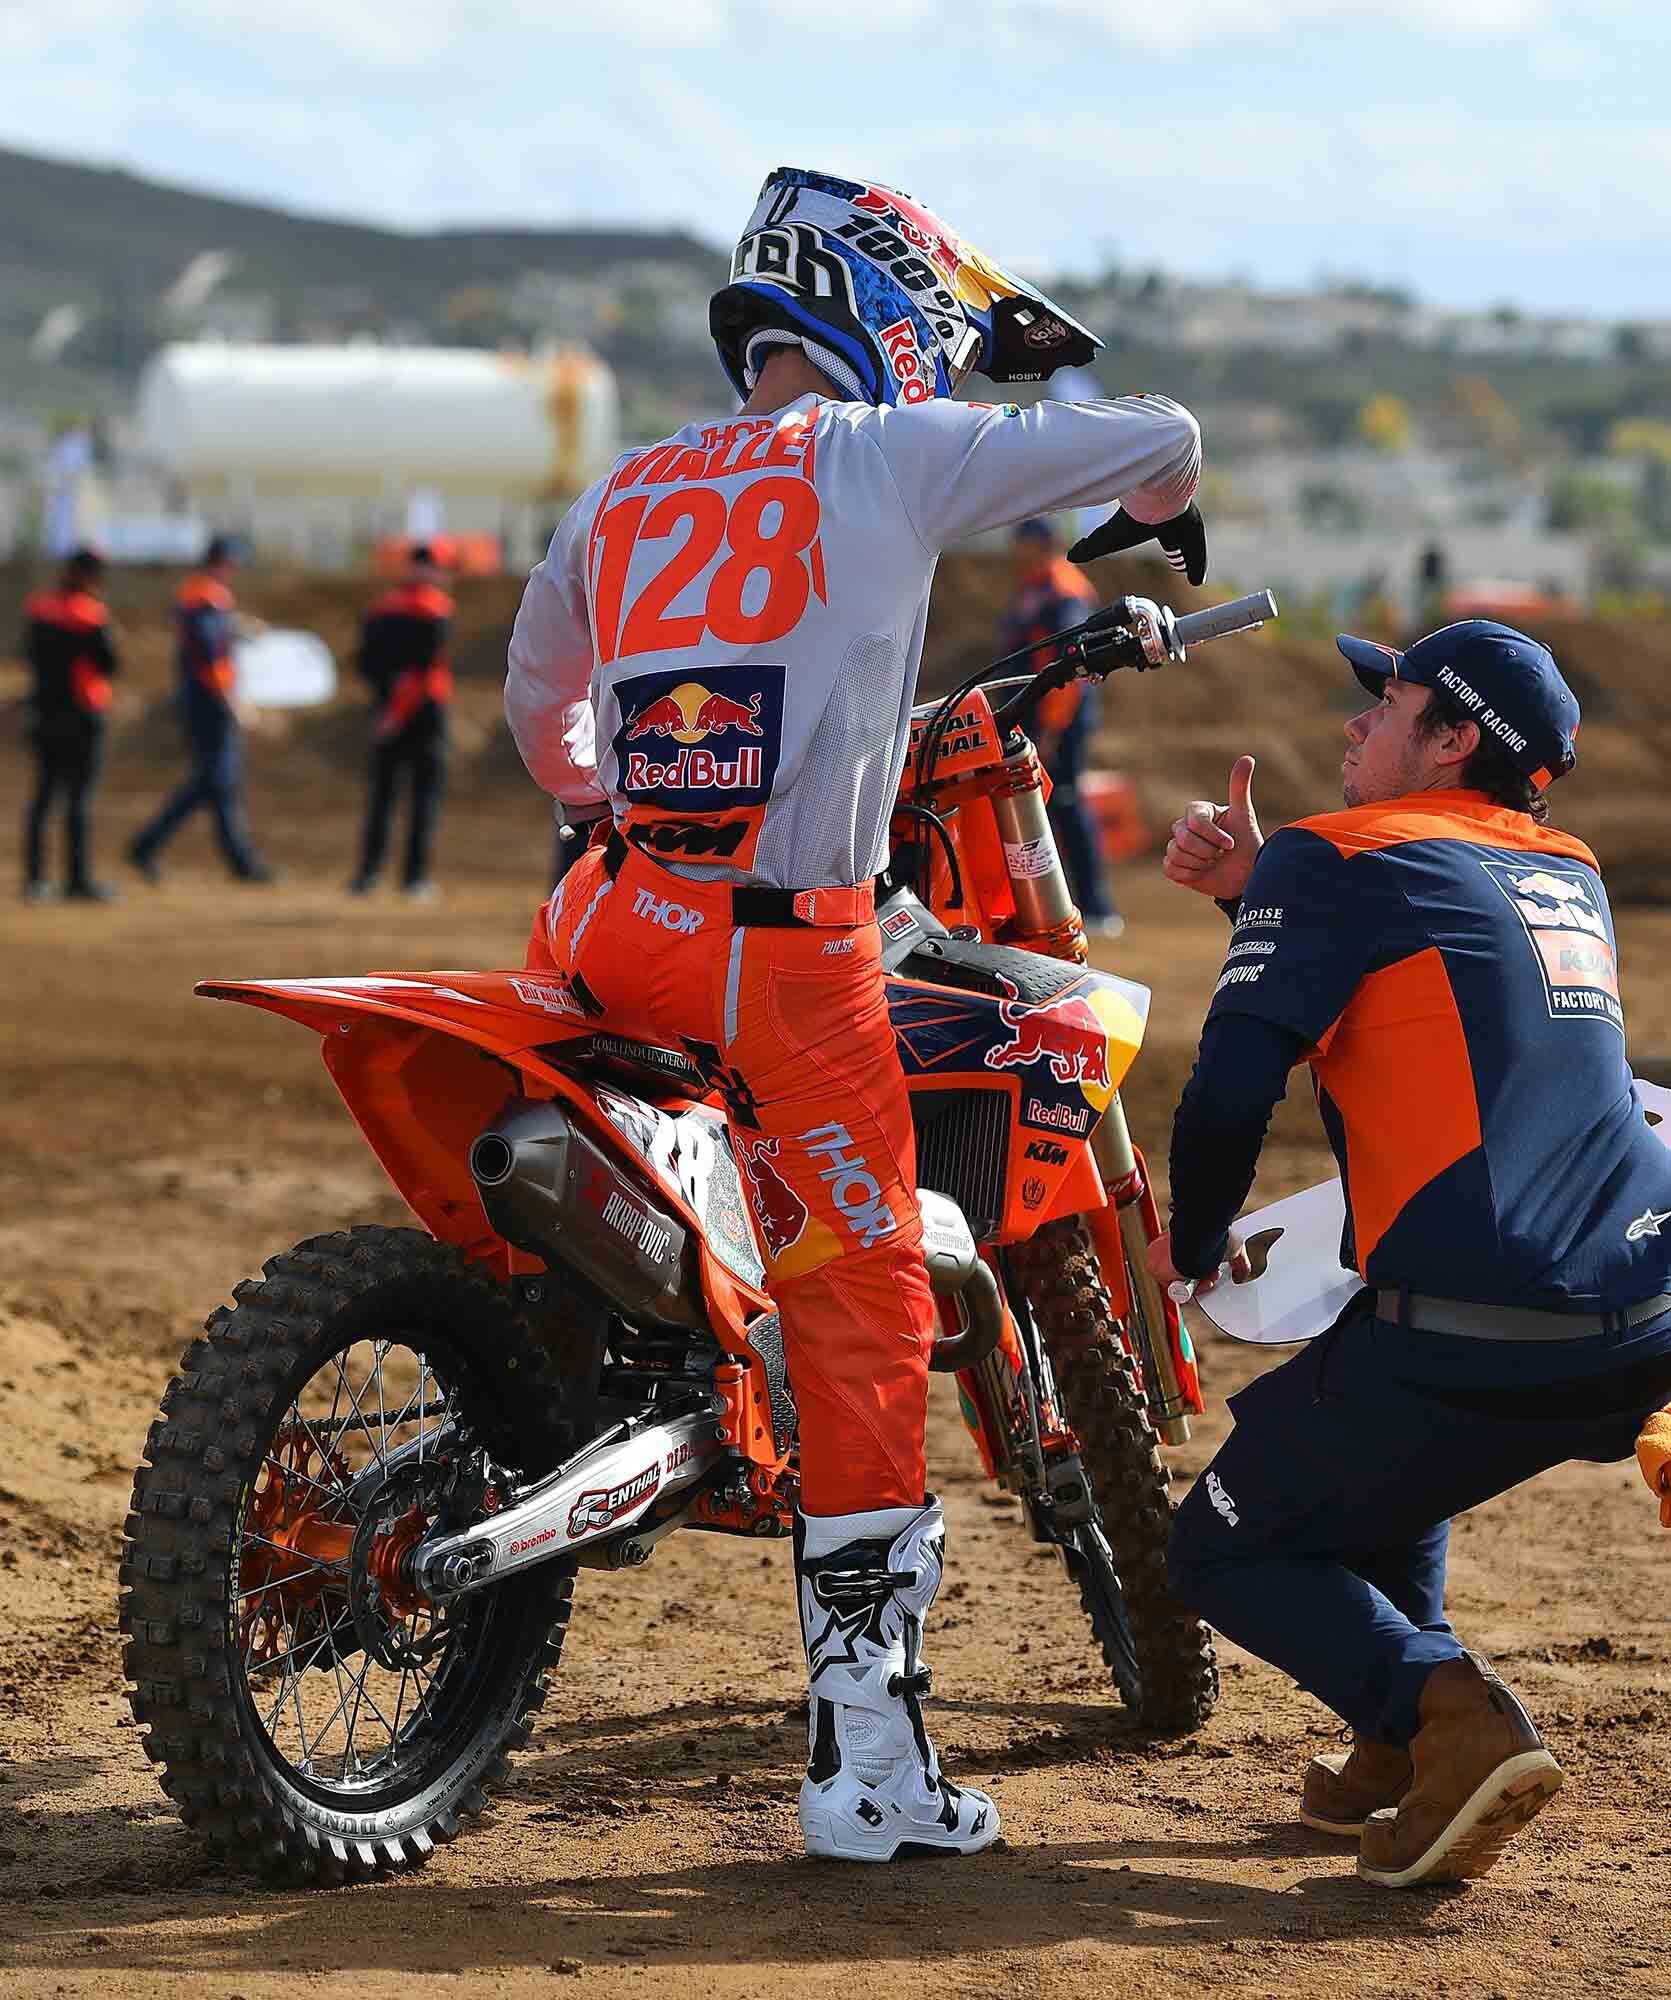 Mechanic Richard Sterling waits for confirmation from new team member Tom Vialle that all’s good before the two-time MX2 world champ heads out for more practice laps at KTM’s private SX test track.